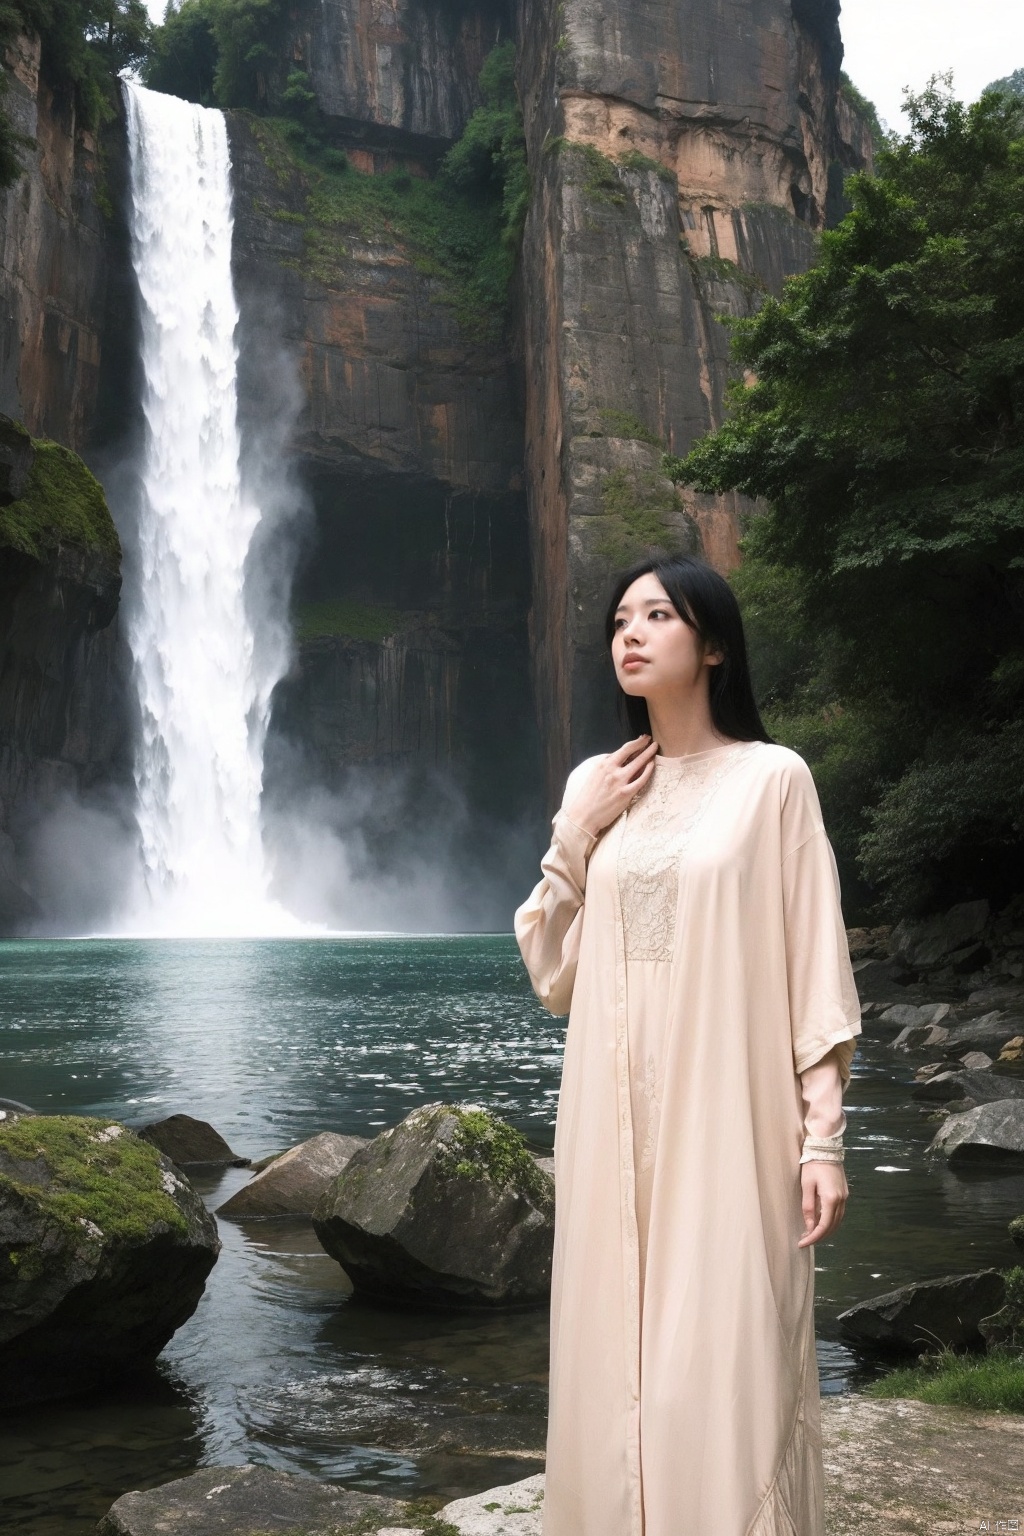 Beneath a towering cliff,a woman stands with a cascading waterfall behind her. The weather is overcast,casting the scene in a palette of cool,subdued colors. The water's roar contrasts with the gentle,soft composition of the scene,creating a sense of harmony between nature's power and tranquility. The woman's presence adds a contemplative,serene quality to the landscape,as she gazes into the distance under the cloudy sky.,